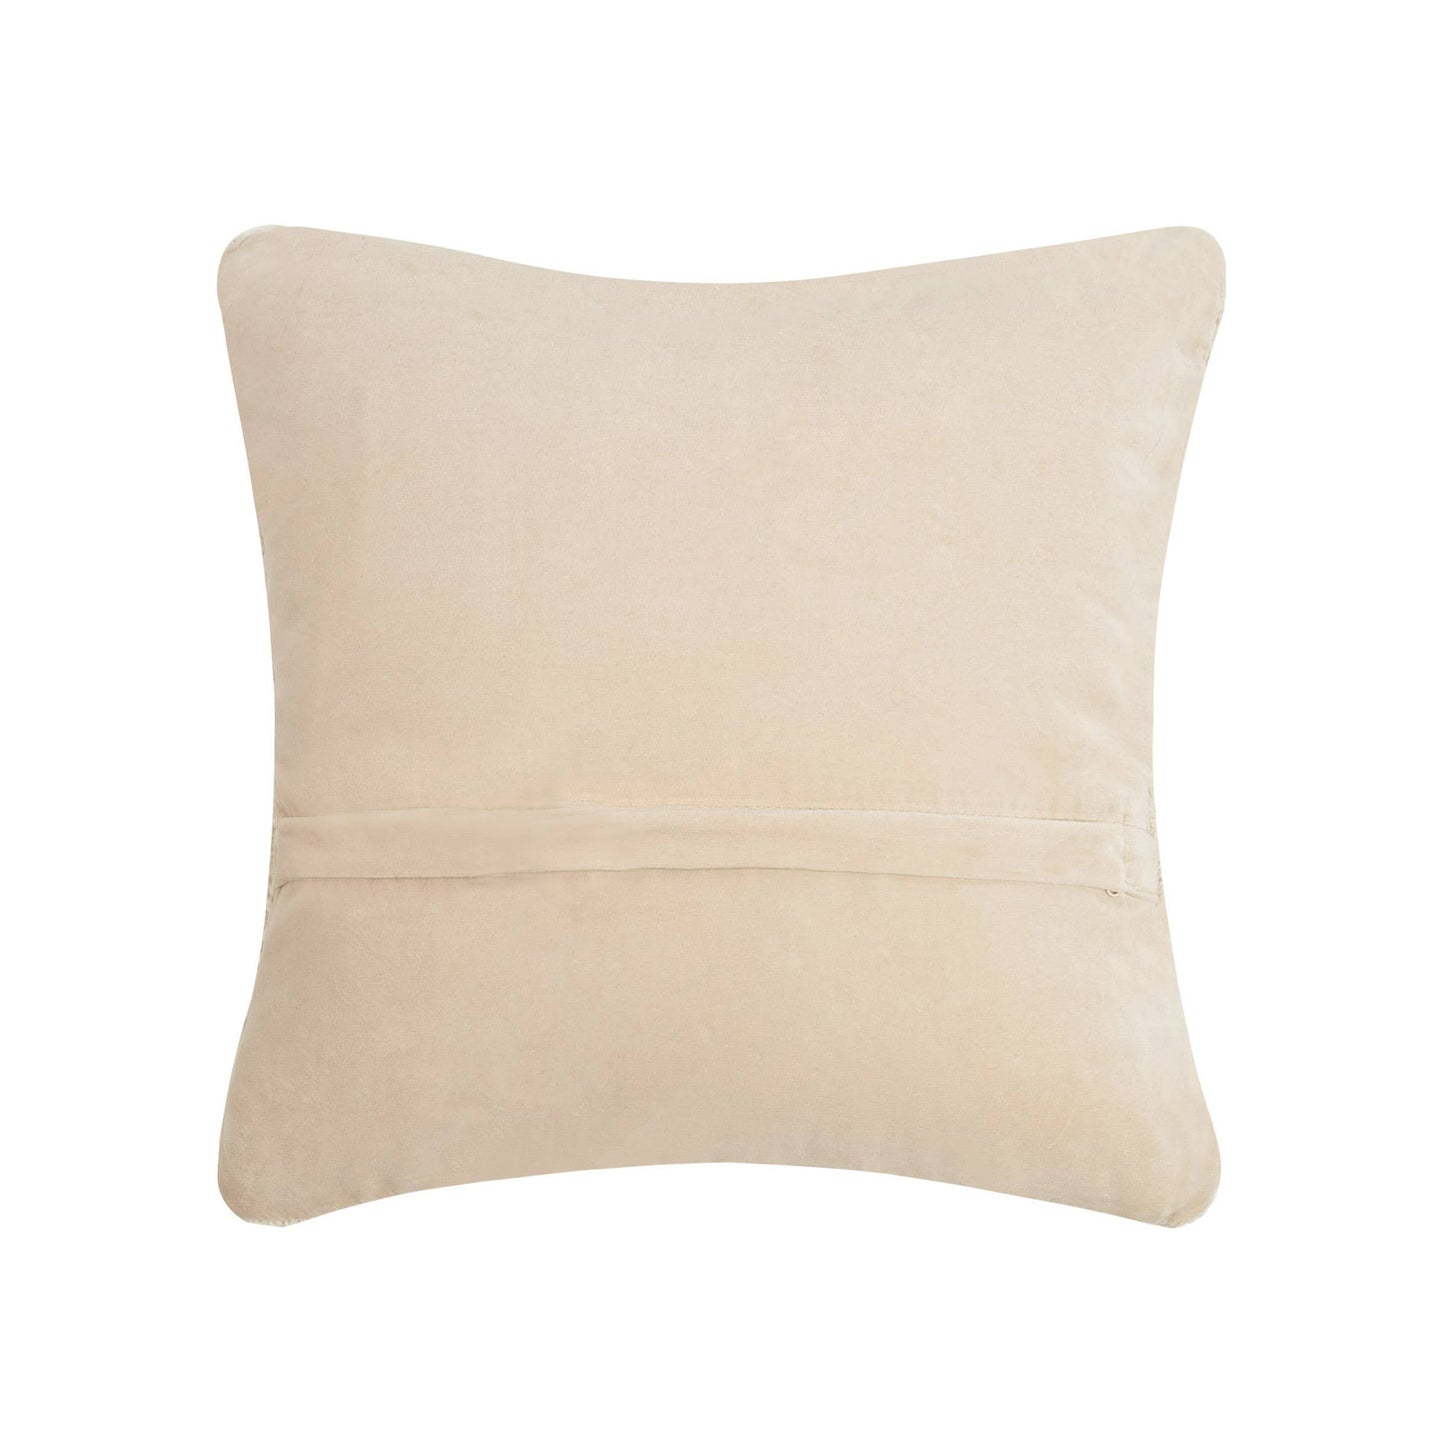 Chill Out Pillow 14x14"